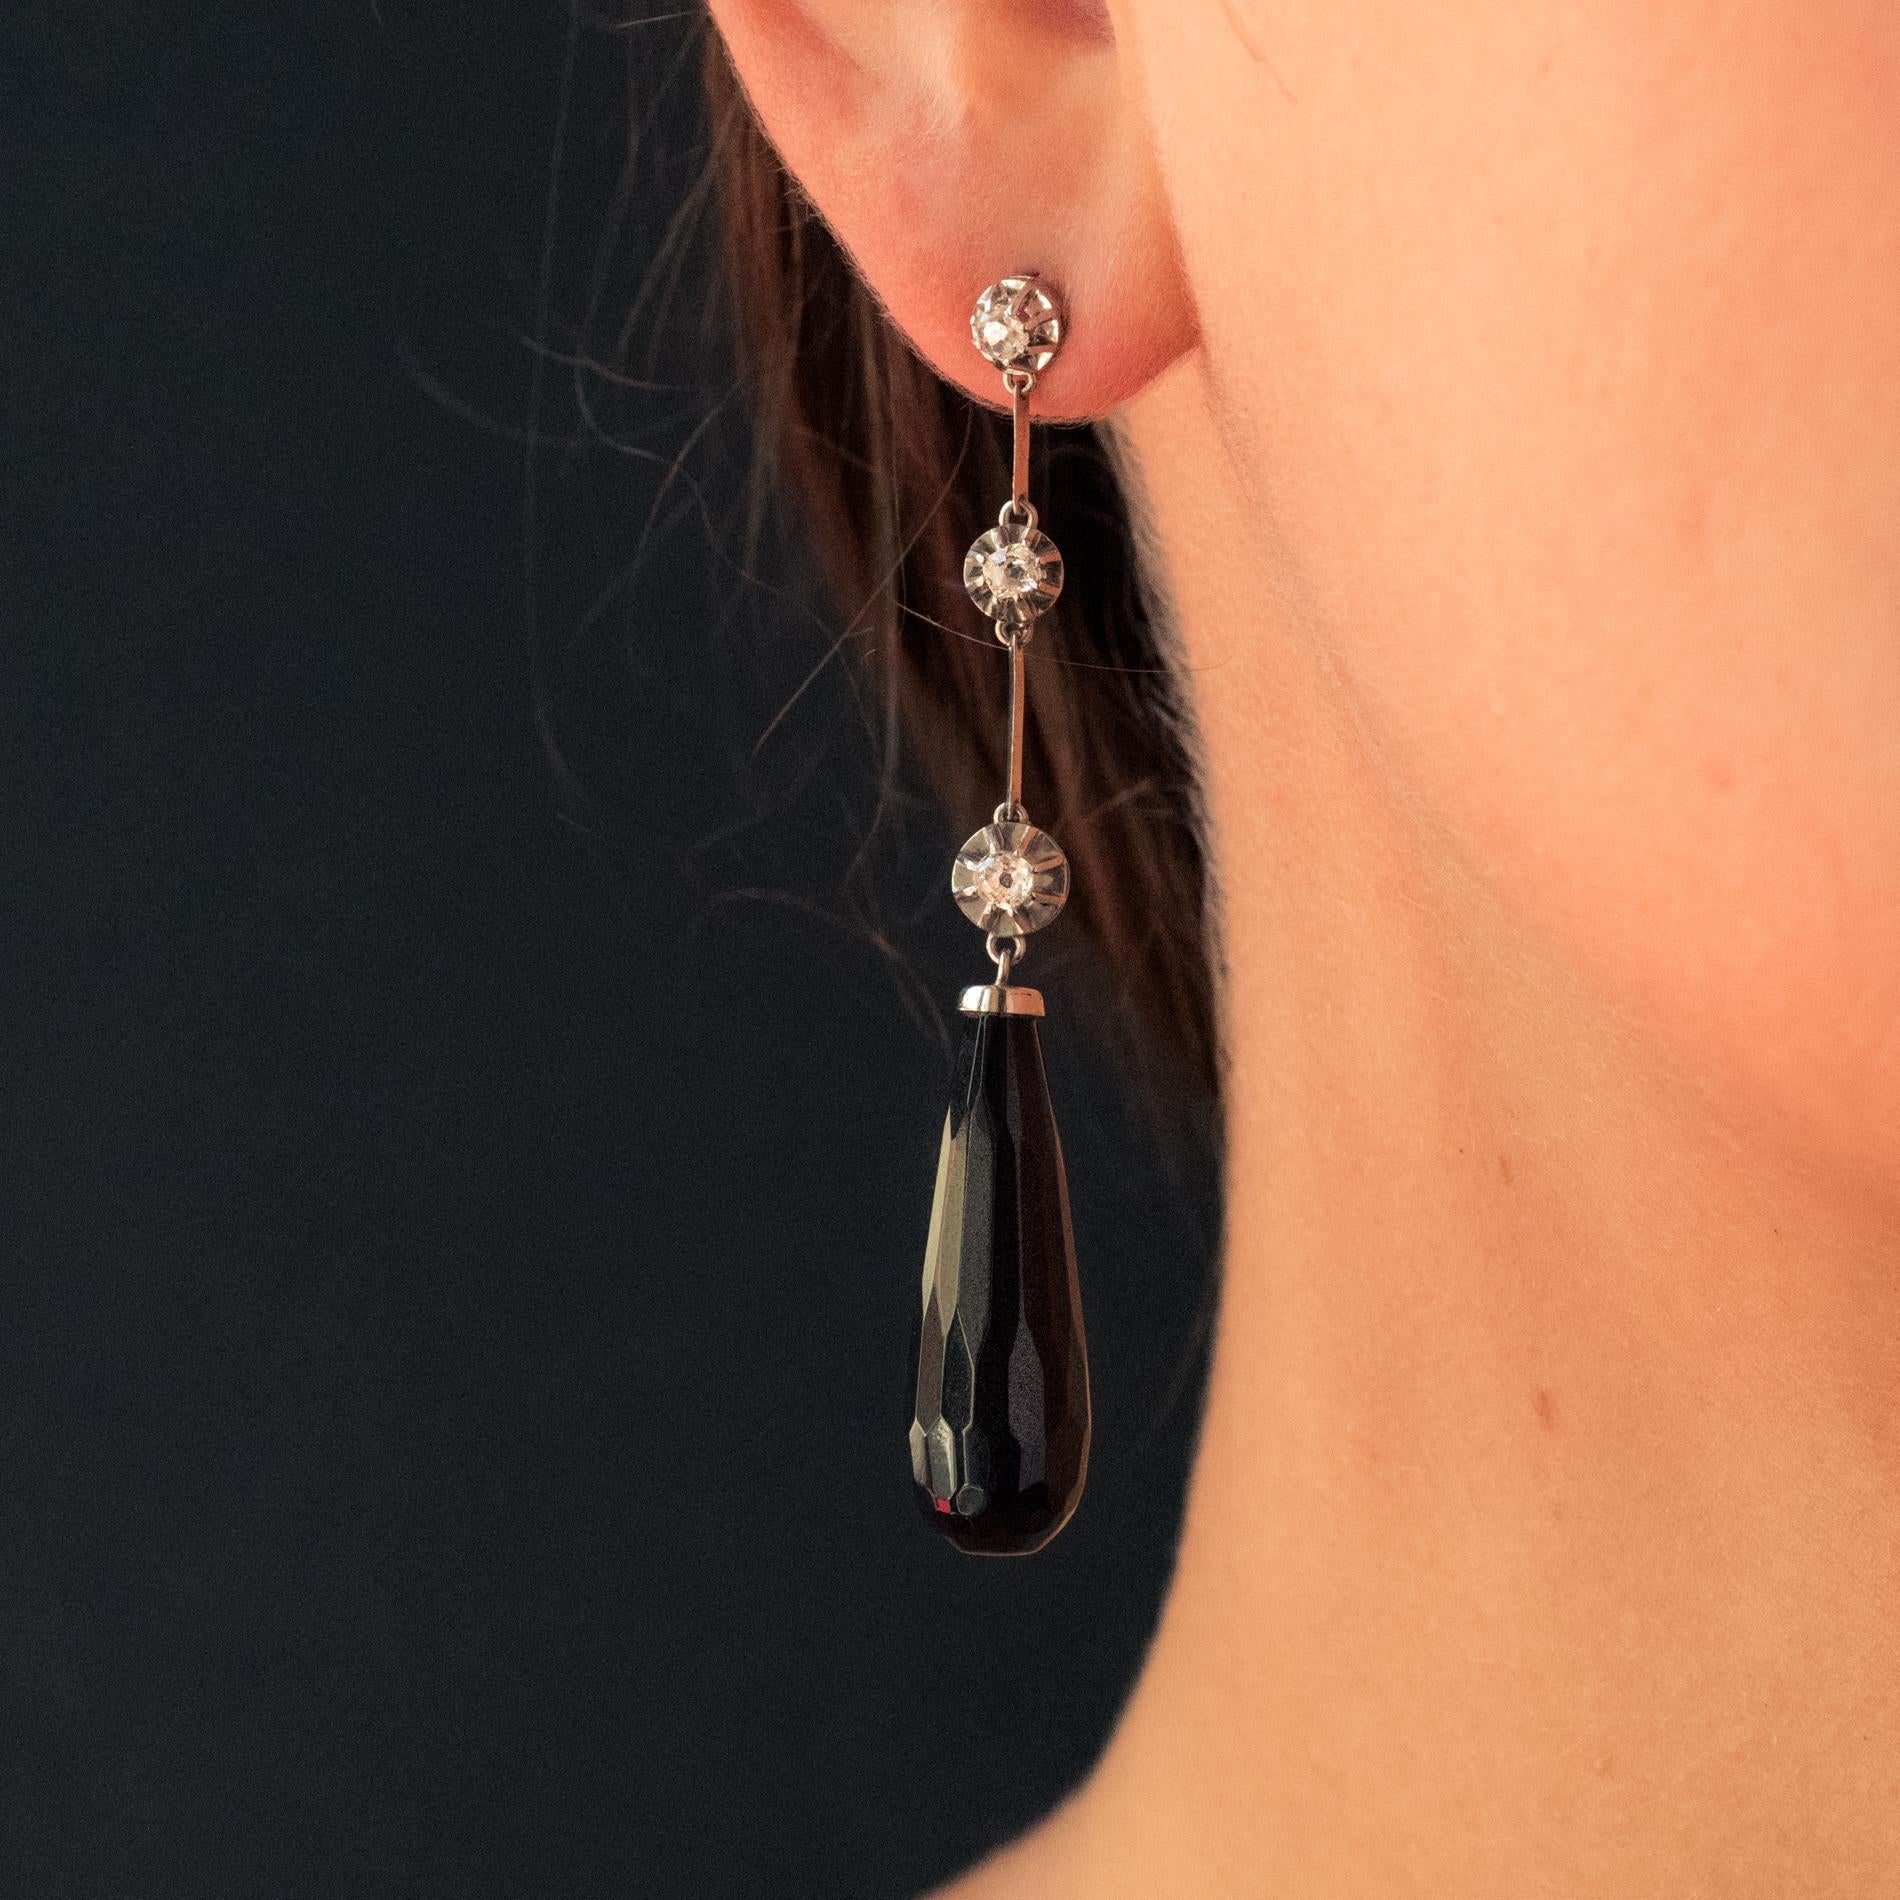 Earring in platinum and 18 karat white gold eagle's head hallmark.
Slender earrings, they are formed from a drop of 3 antique cushion-cut diamonds separated by knives, and set with claws. The all retains a droplet of faceted onyx as a pendant. The